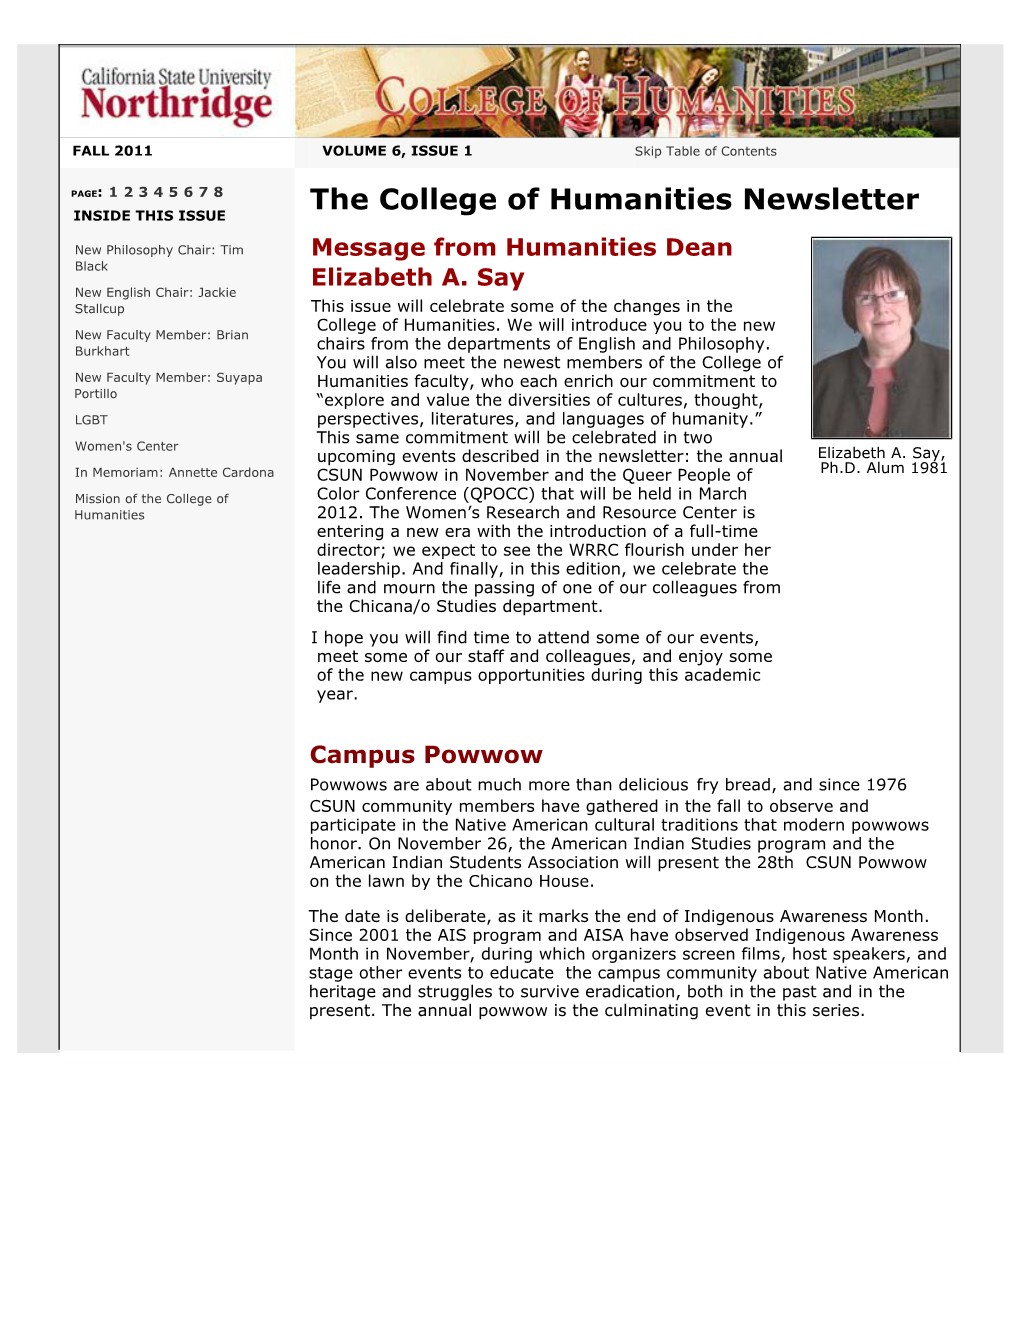 CSUN College of Humanities Newsletter, Fall 2011